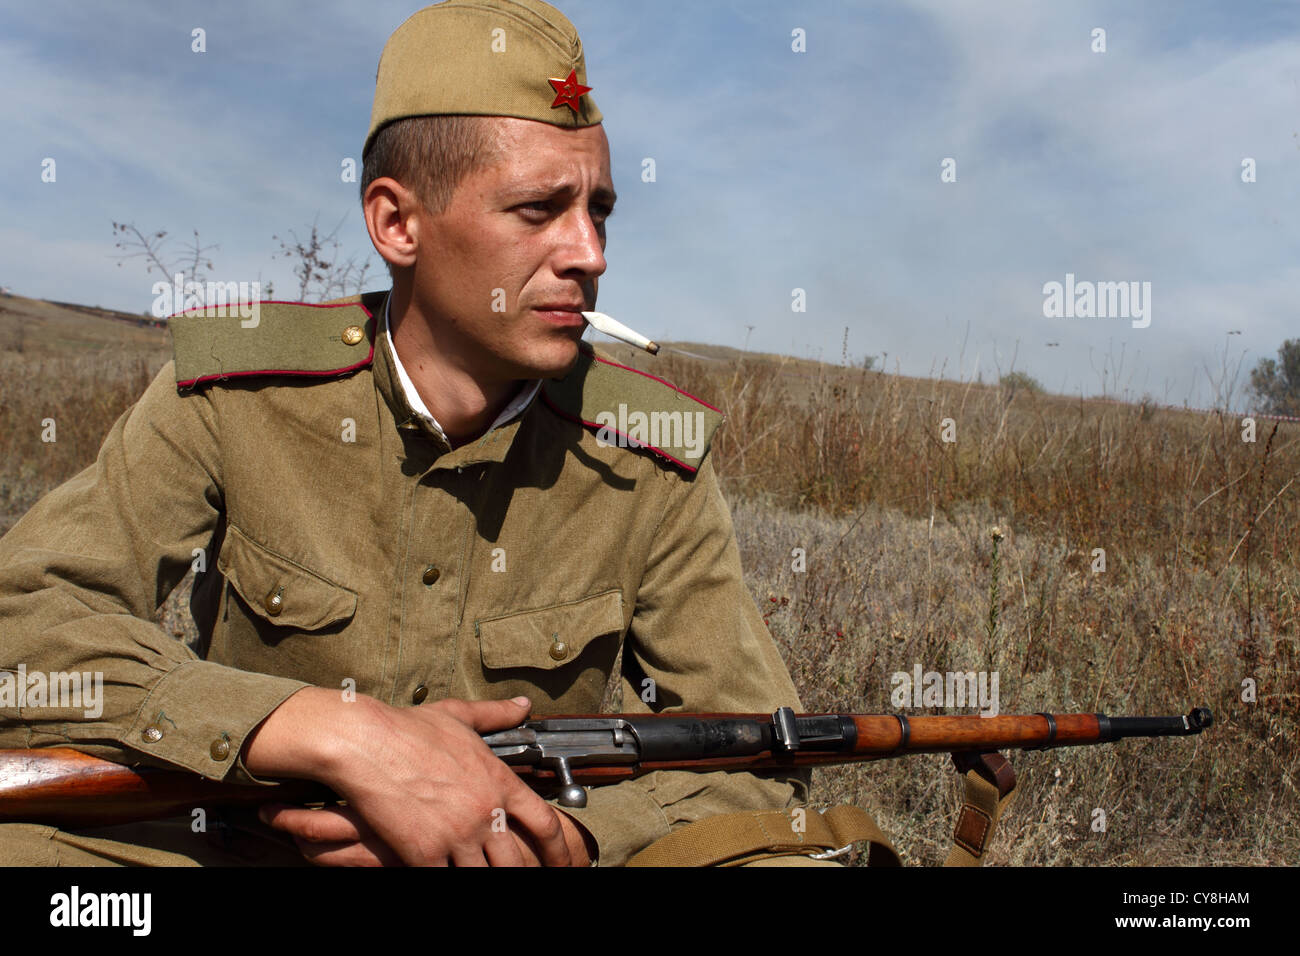 soldier with gun Stock Photo